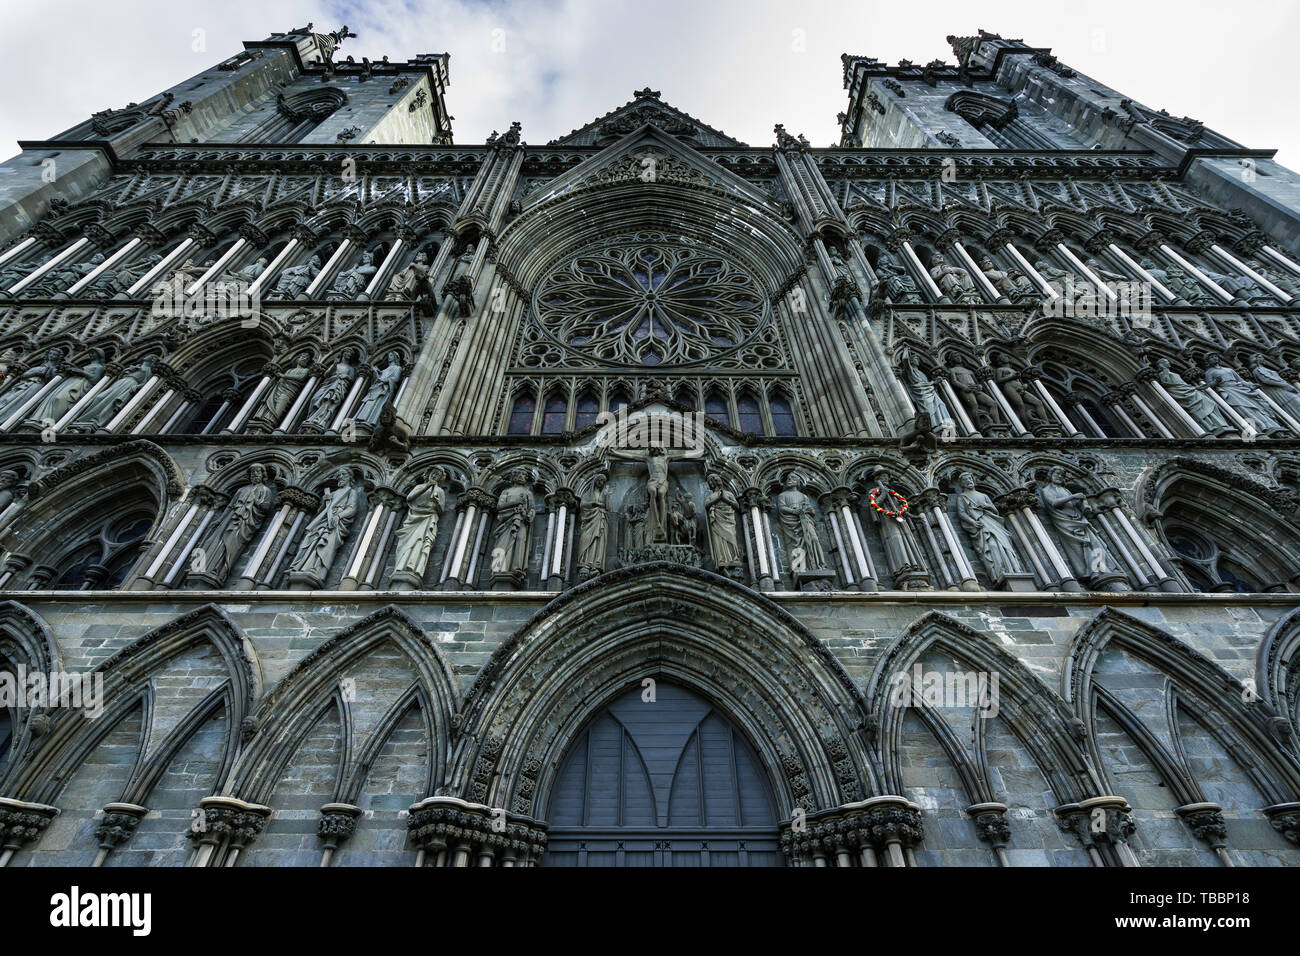 Detail of the Gothic facade of Nidaros Cathedral (Nidaros Domkirke), finely decorated with statues and ornaments Stock Photo